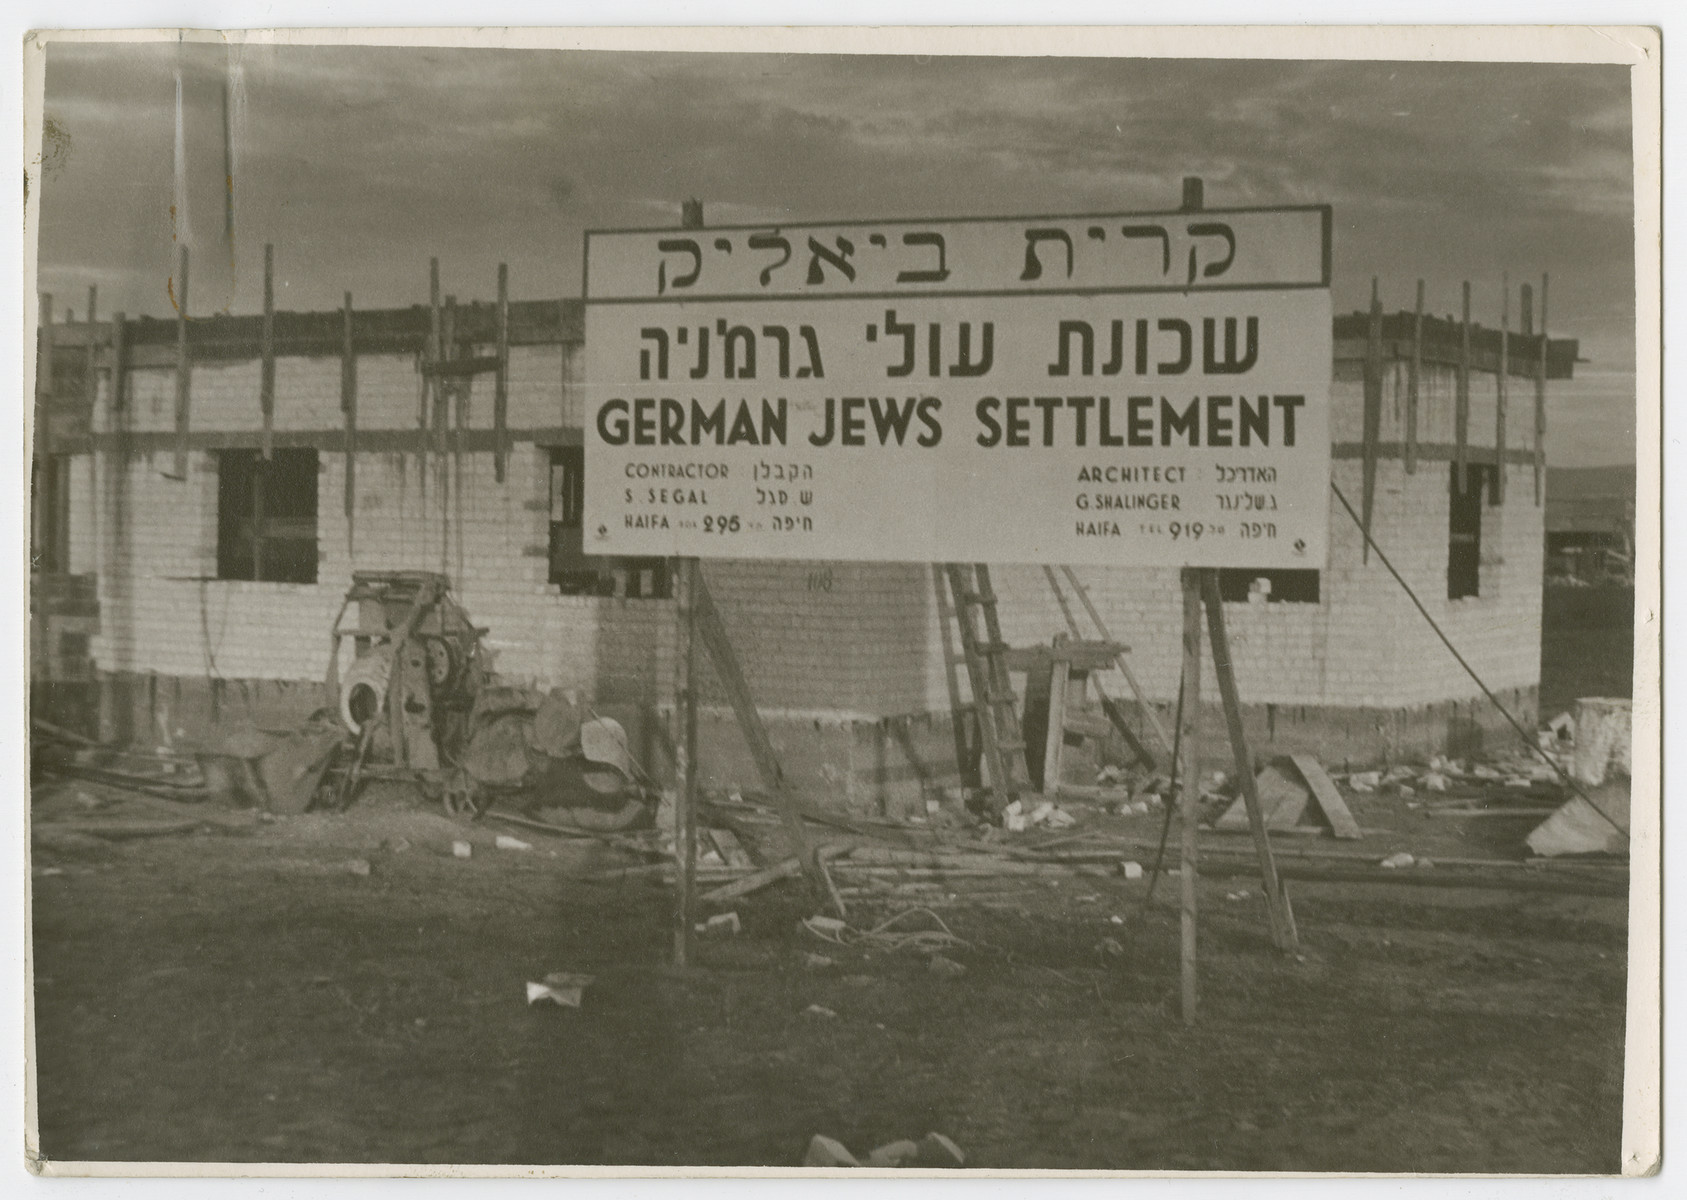 View of the sign announcing the construction of Kiryat Bialik, a new settlement for German Jews.

Photograph is used on page 210 of Robert Gessner's "Some of My Best Friends are Jews." The typed caption attached the photograph reads, "One of the German Jewish colonies constructed in the outskirts of Haifa."